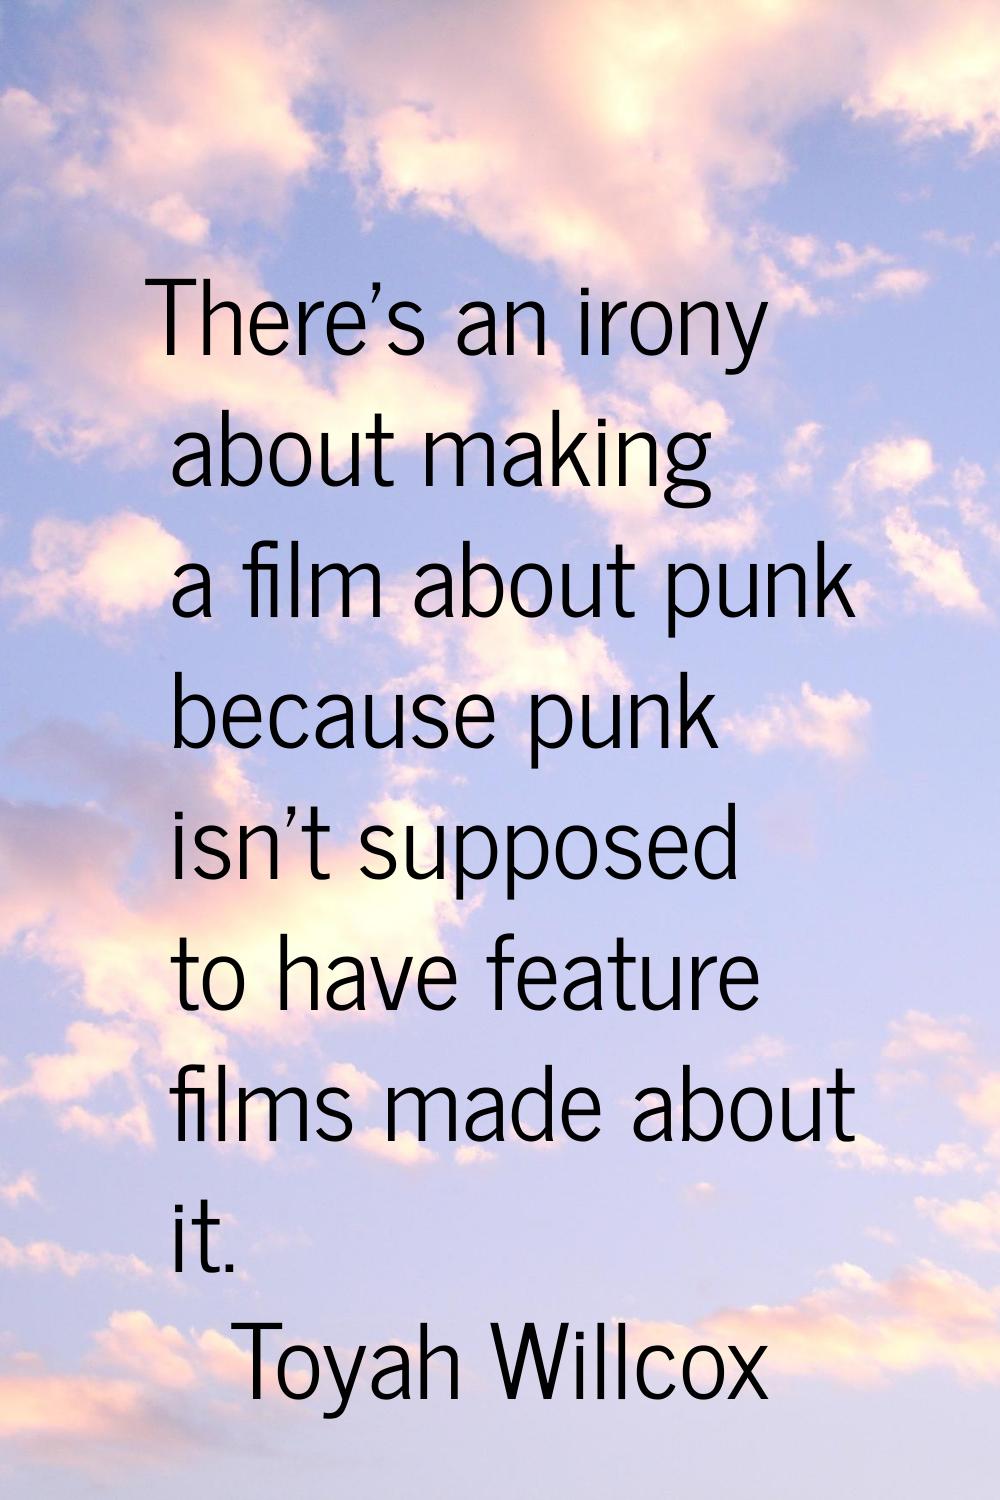 There's an irony about making a film about punk because punk isn't supposed to have feature films m